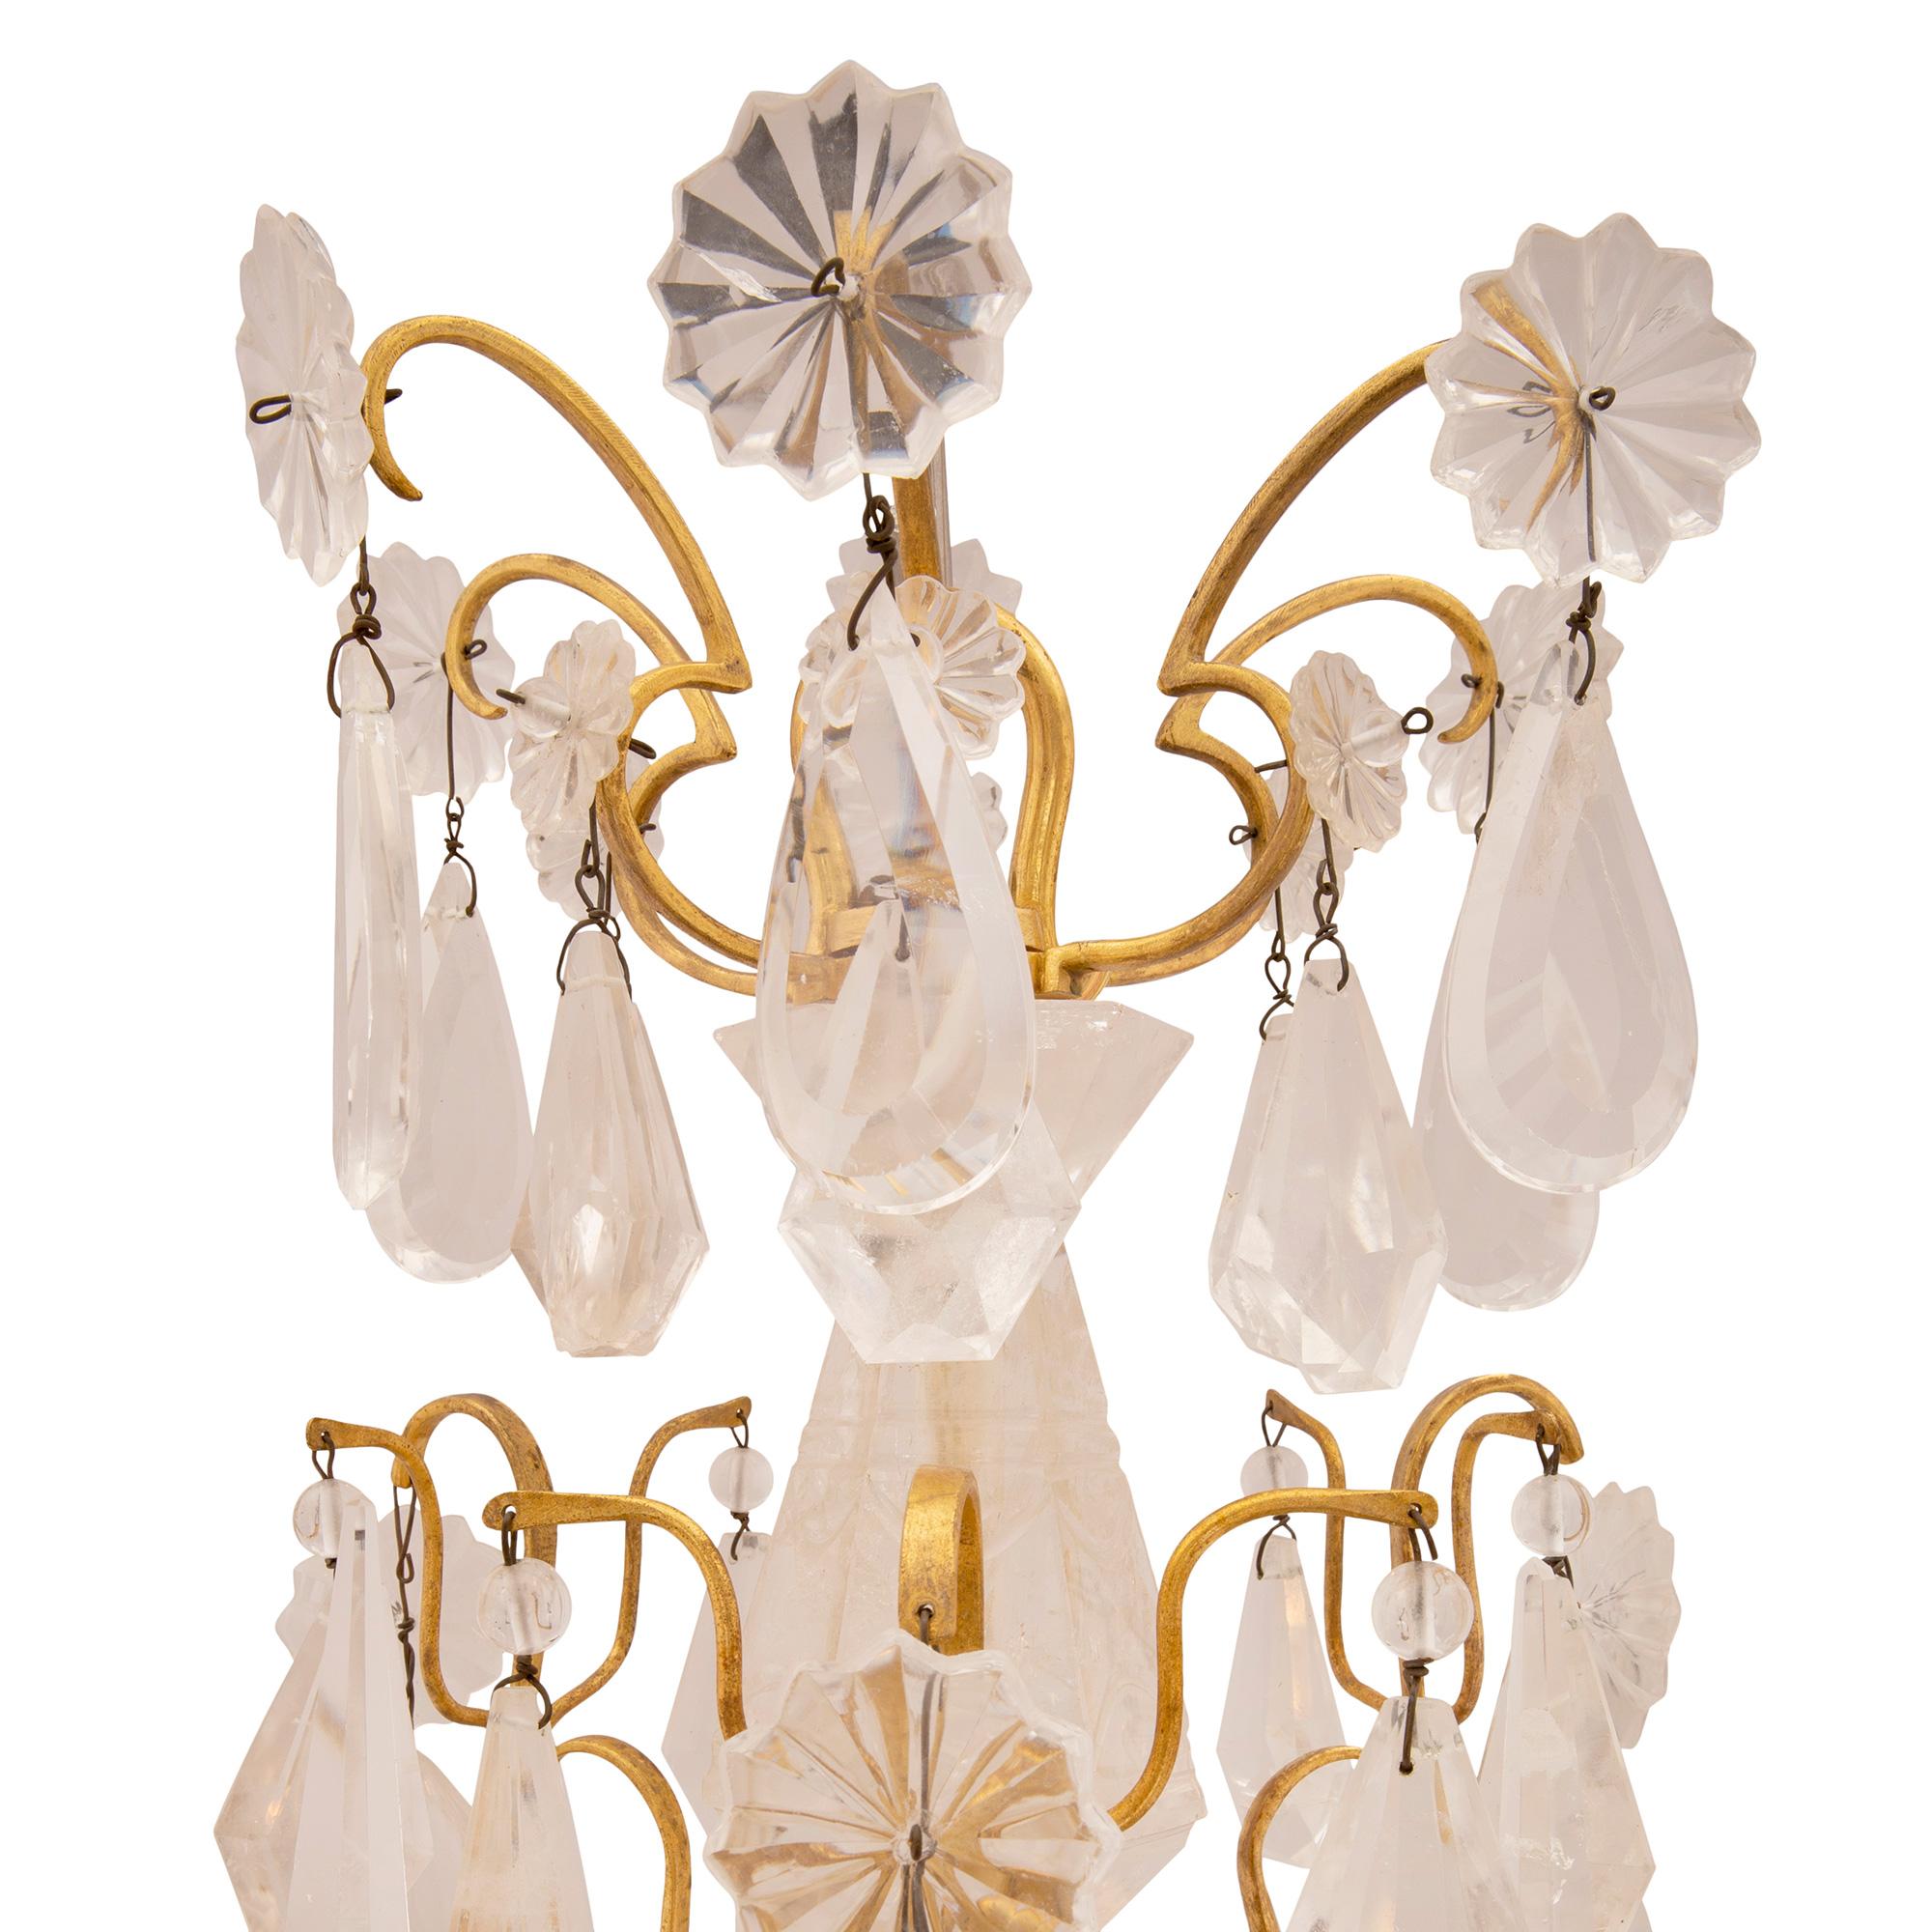 French 18th Century Louis XV Period Ormolu and Rock Crystal Chandelier In Good Condition For Sale In West Palm Beach, FL